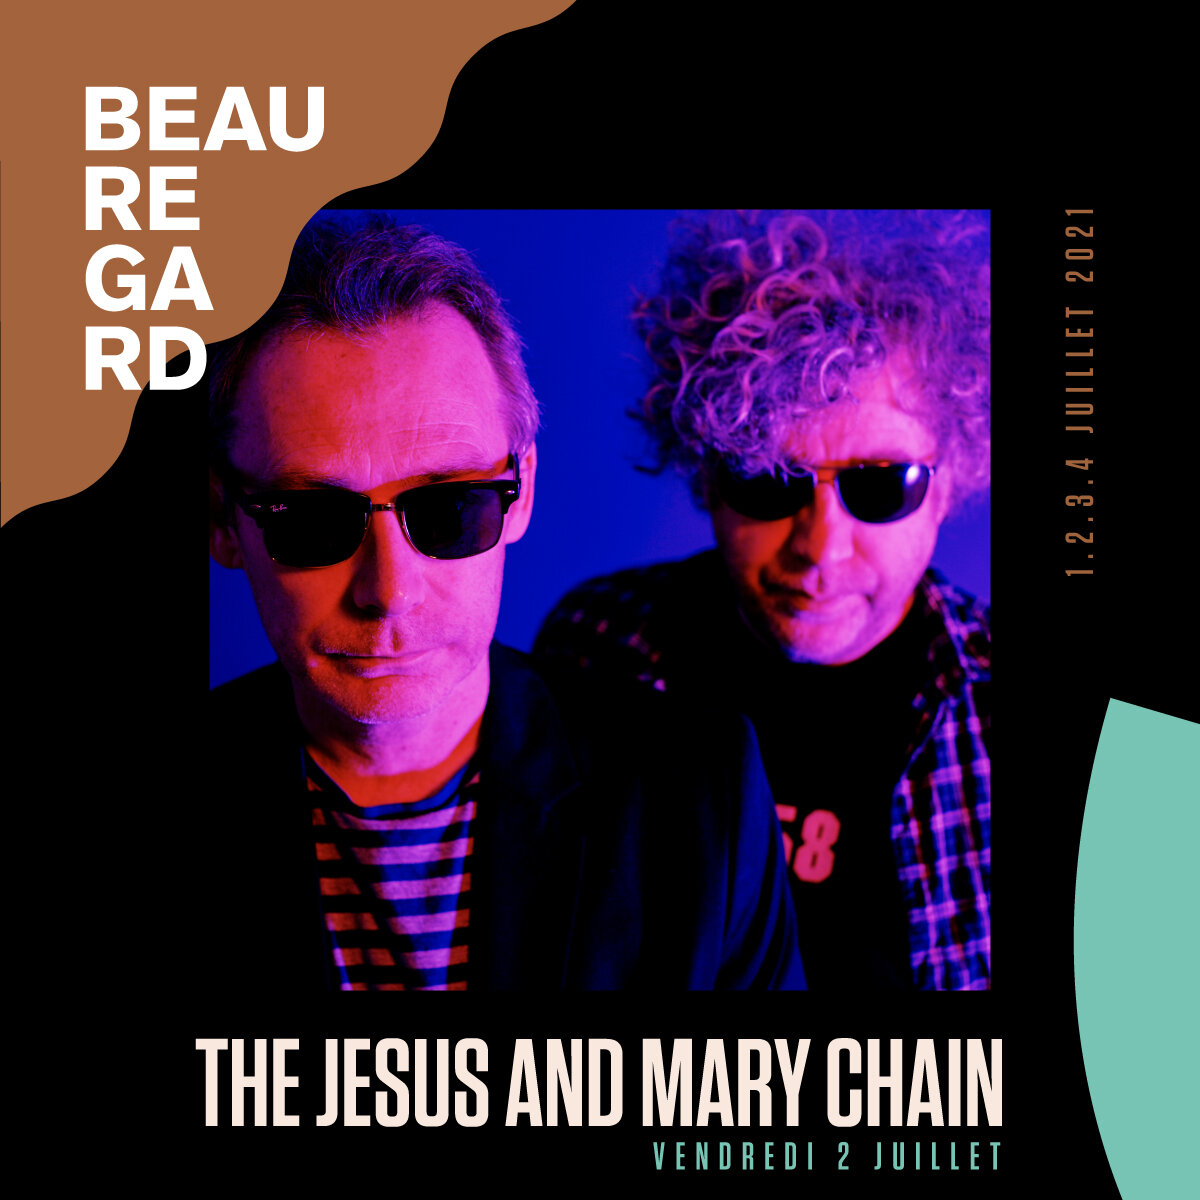 The jesus and mary chain glasgow eyes. Аргументы и факты the Jesus and Mary Chain.